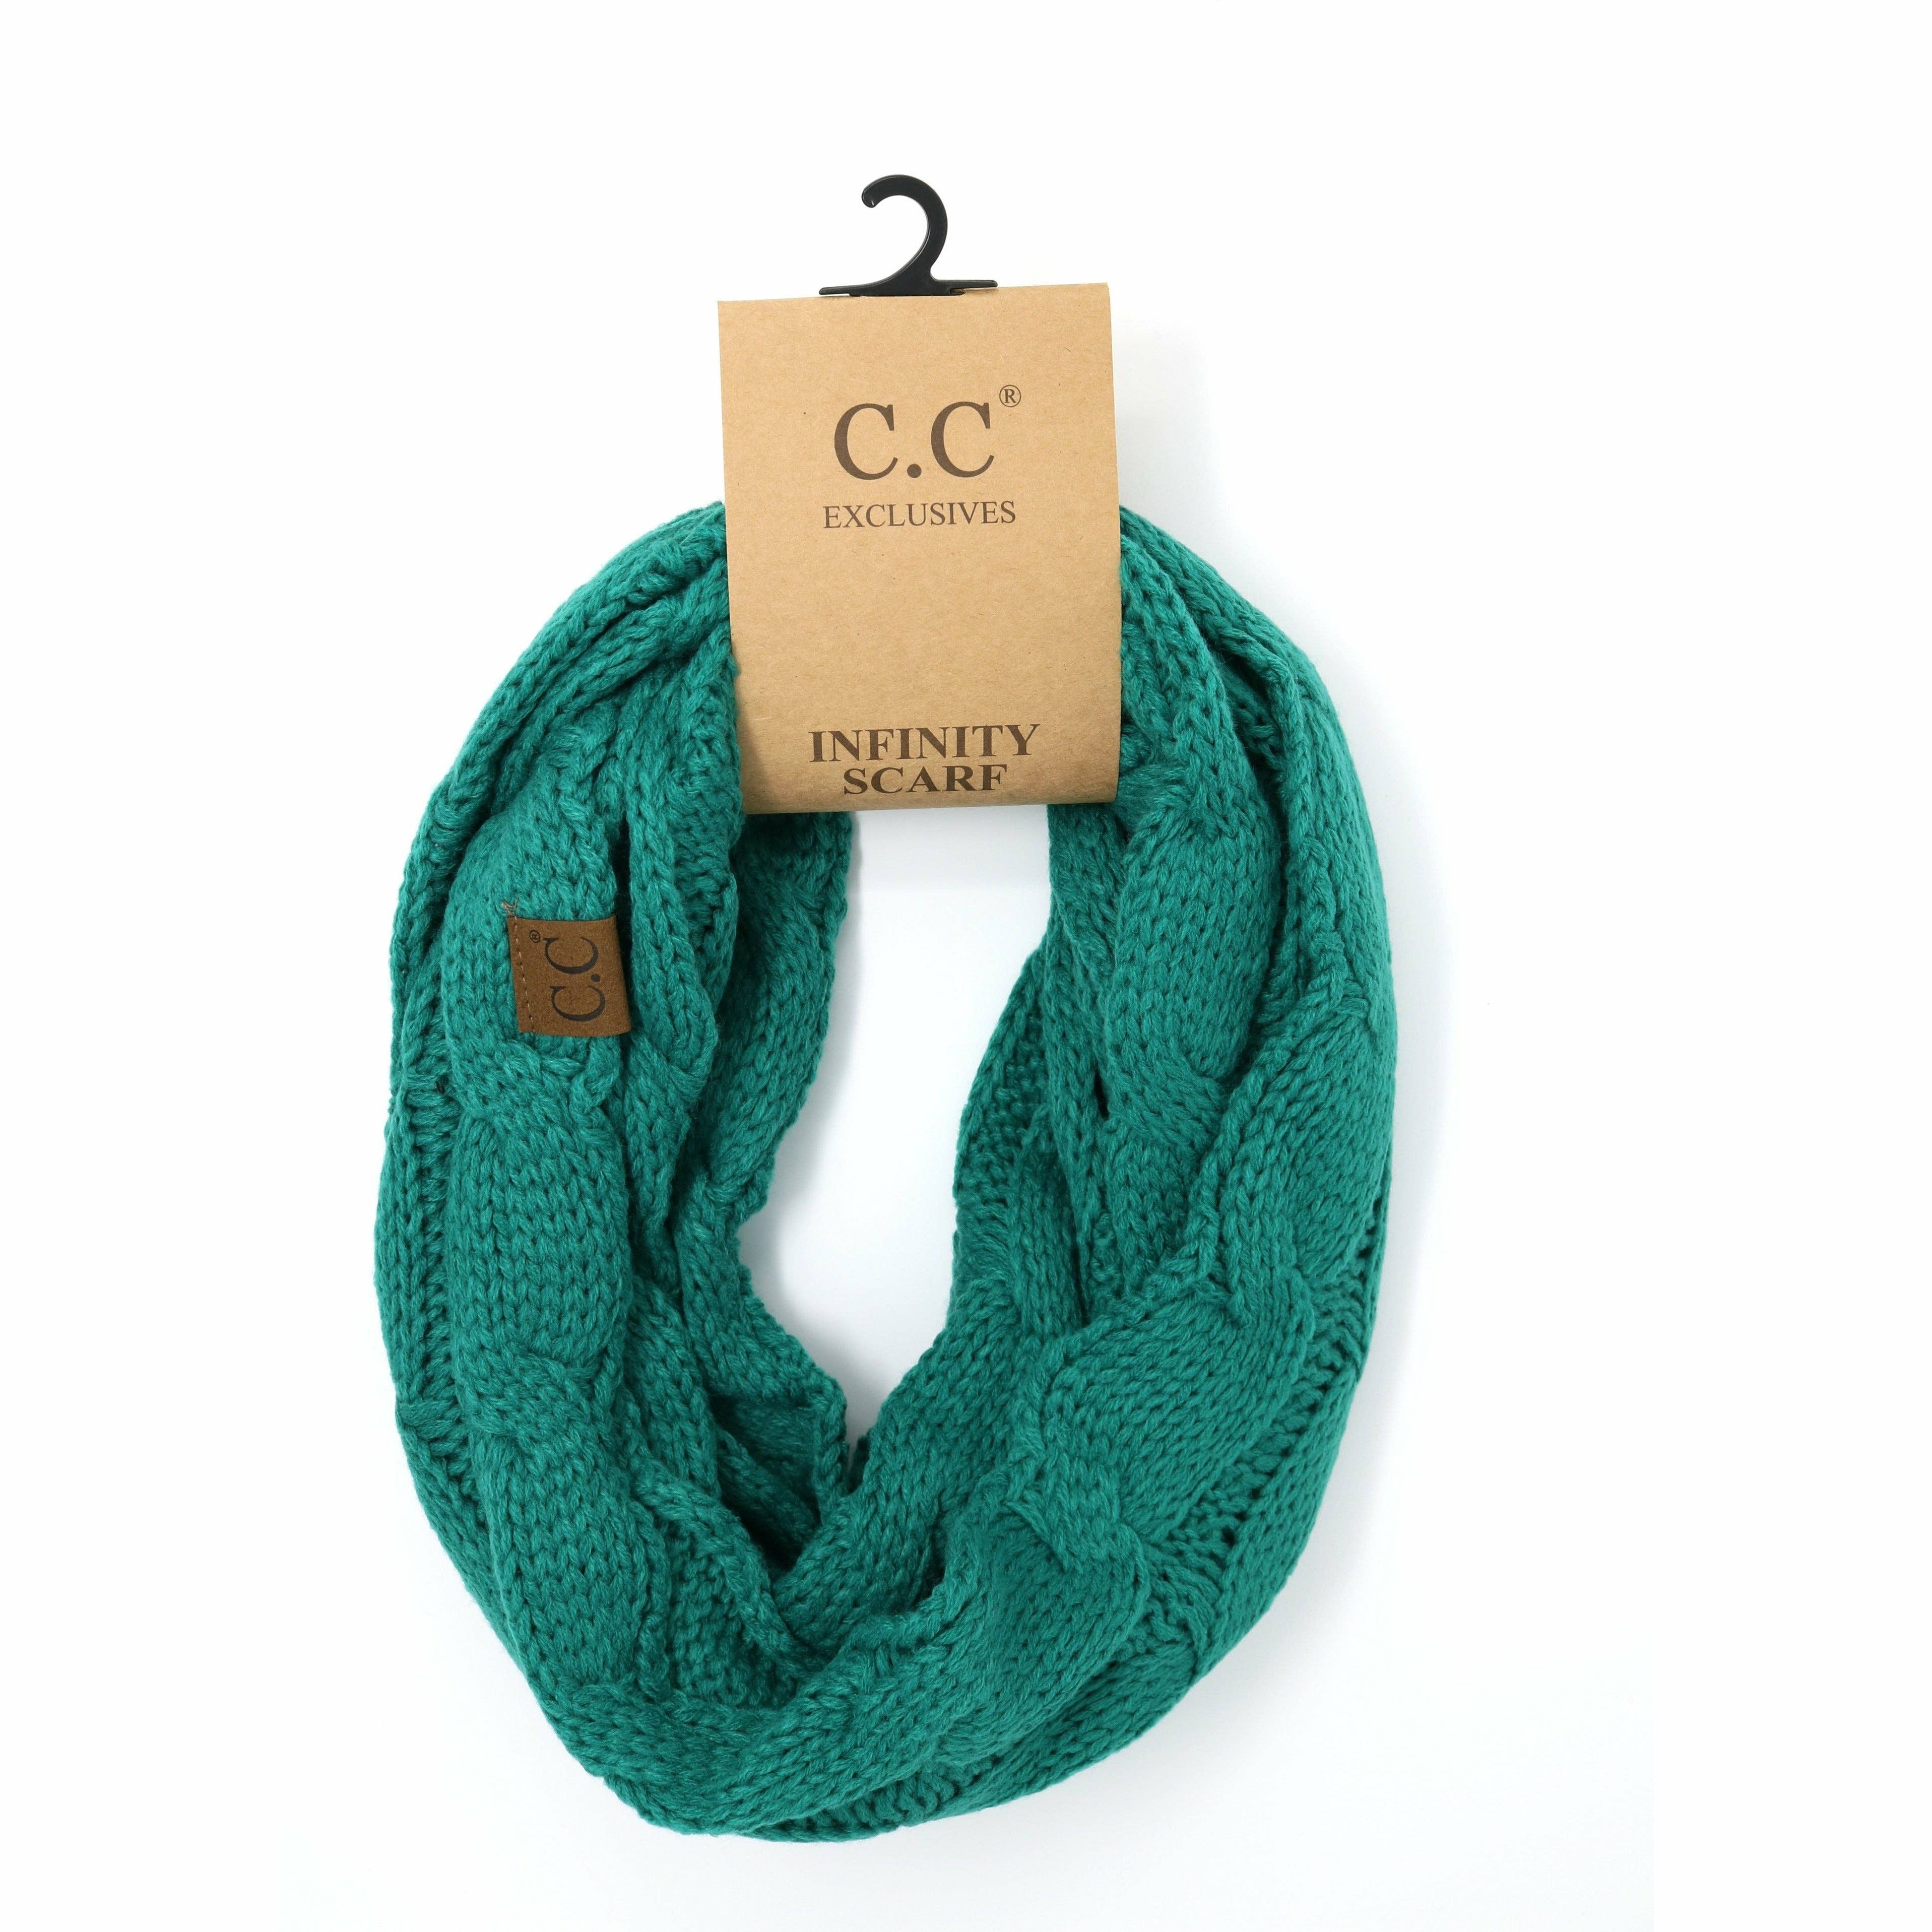 Solid Cable Knit CC Infinity Scarf SF800: Black